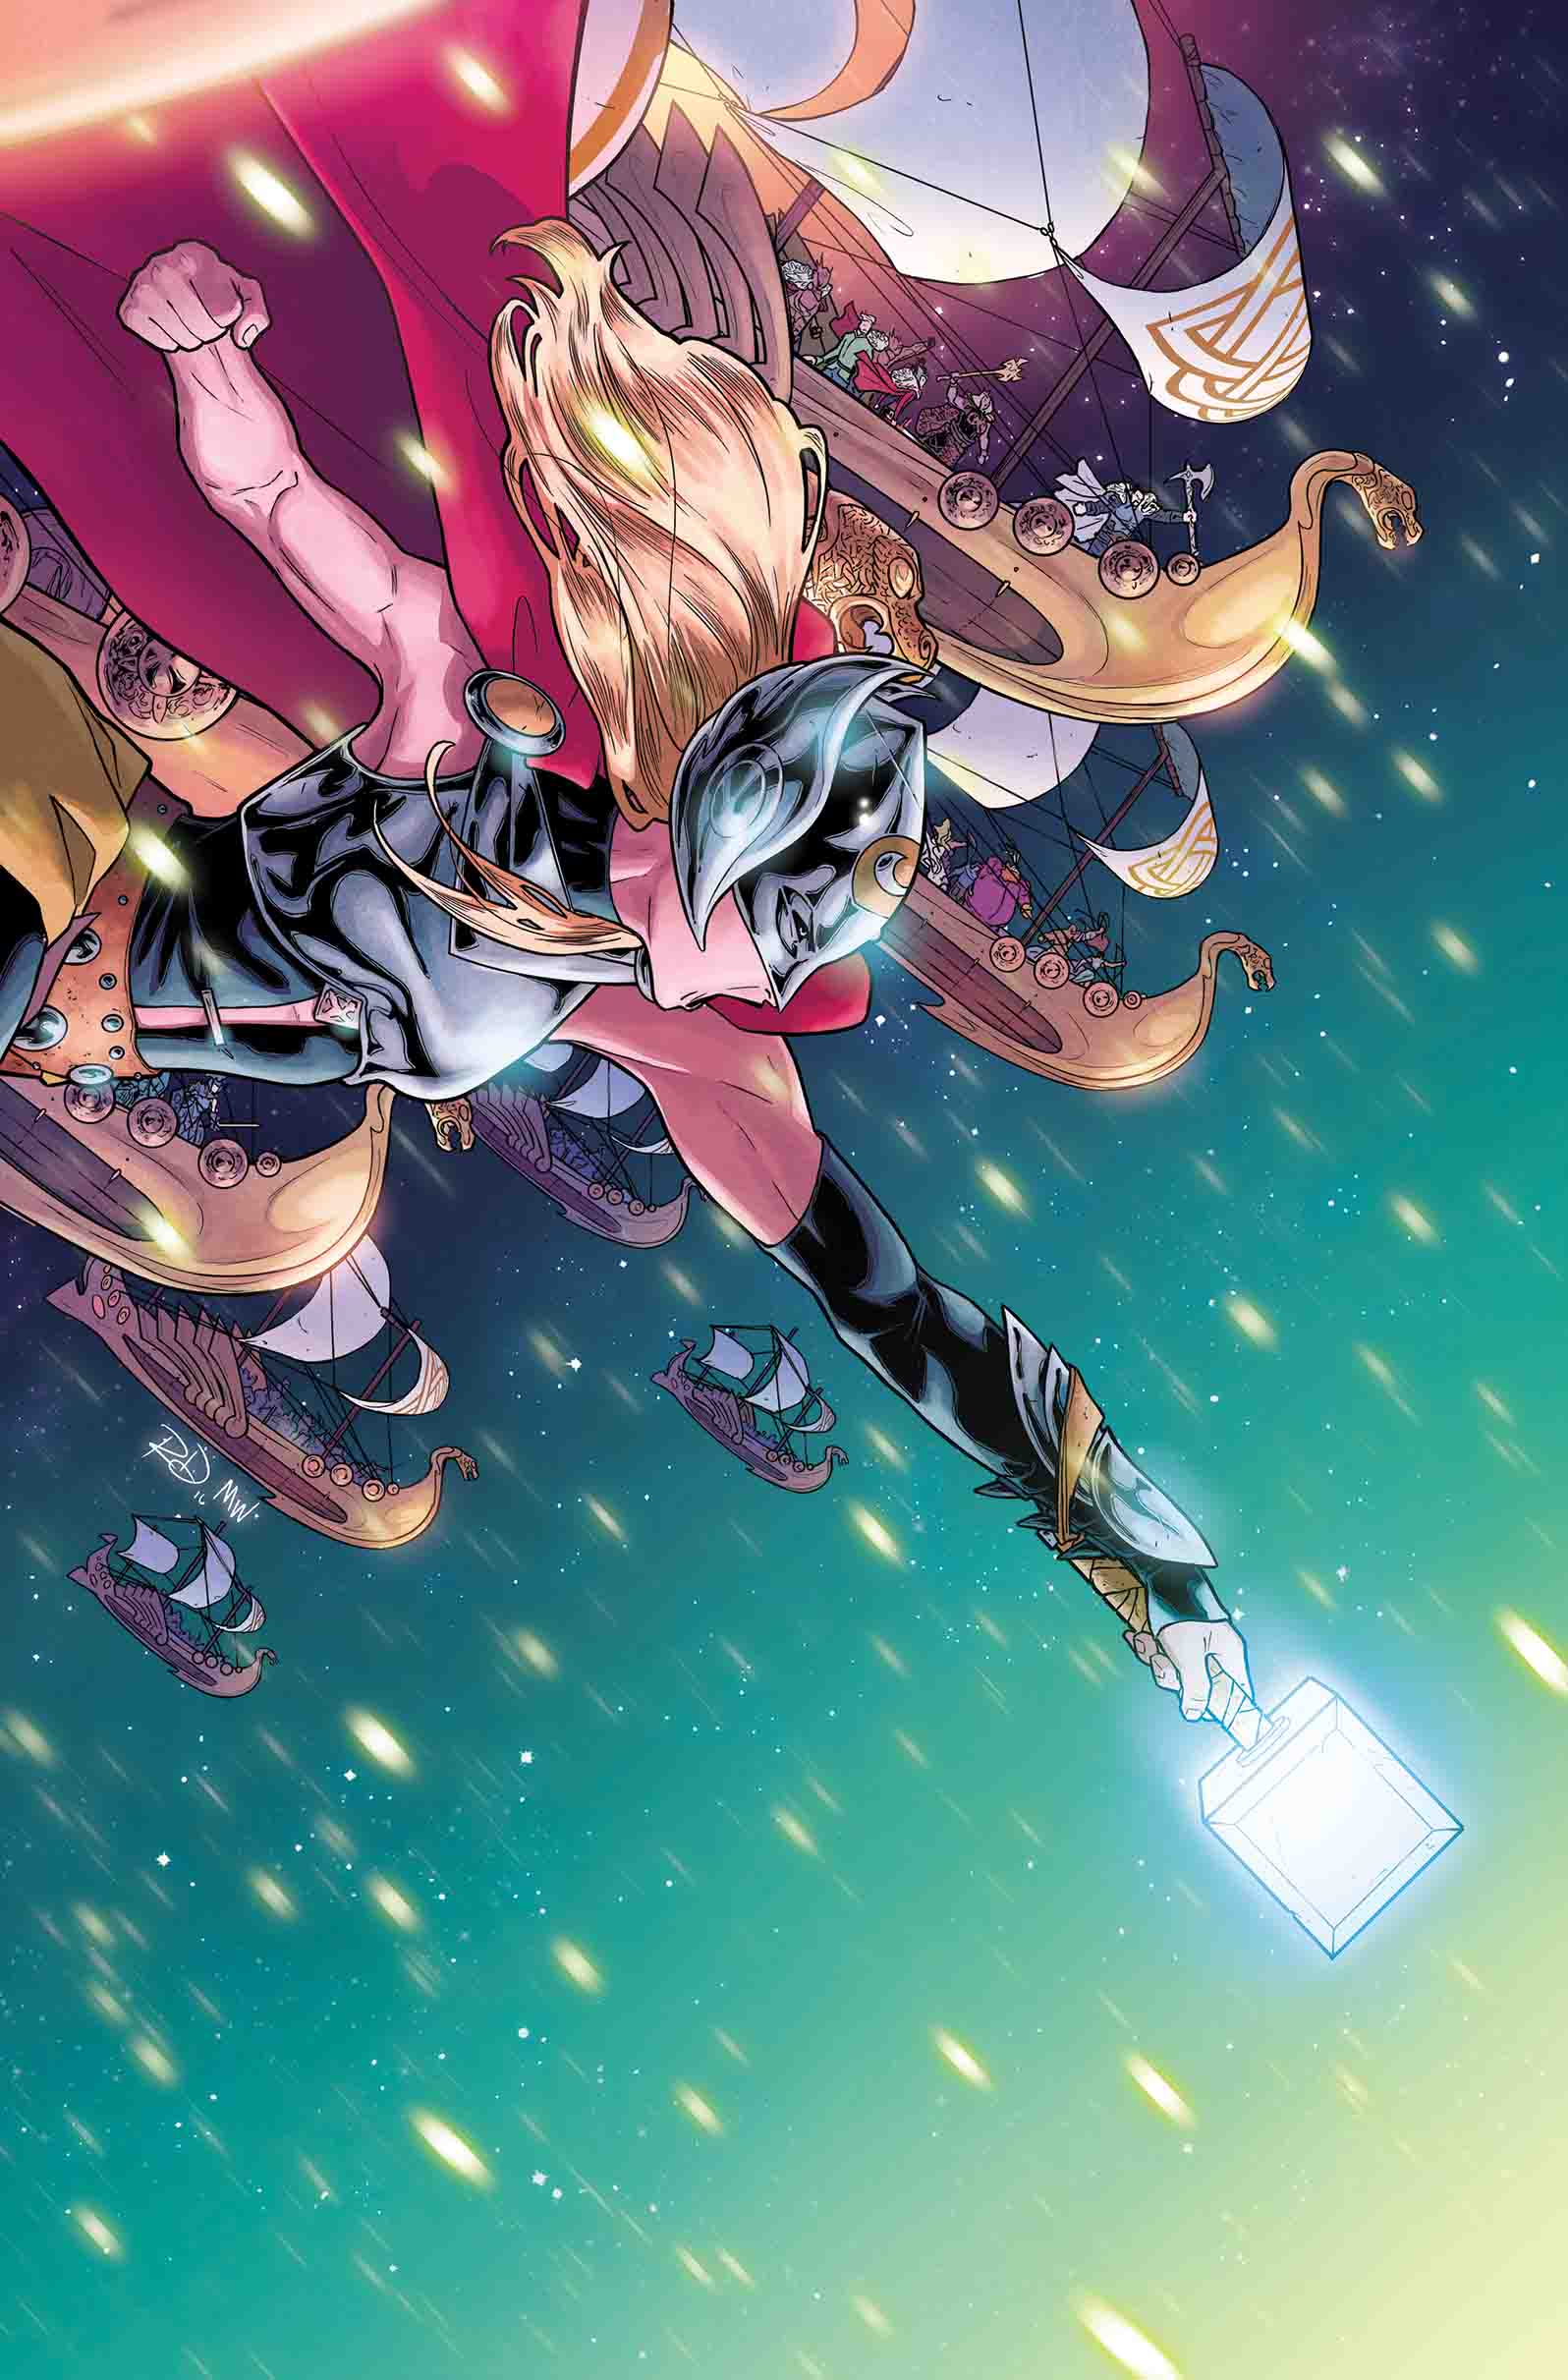 MIGHTY THOR #17